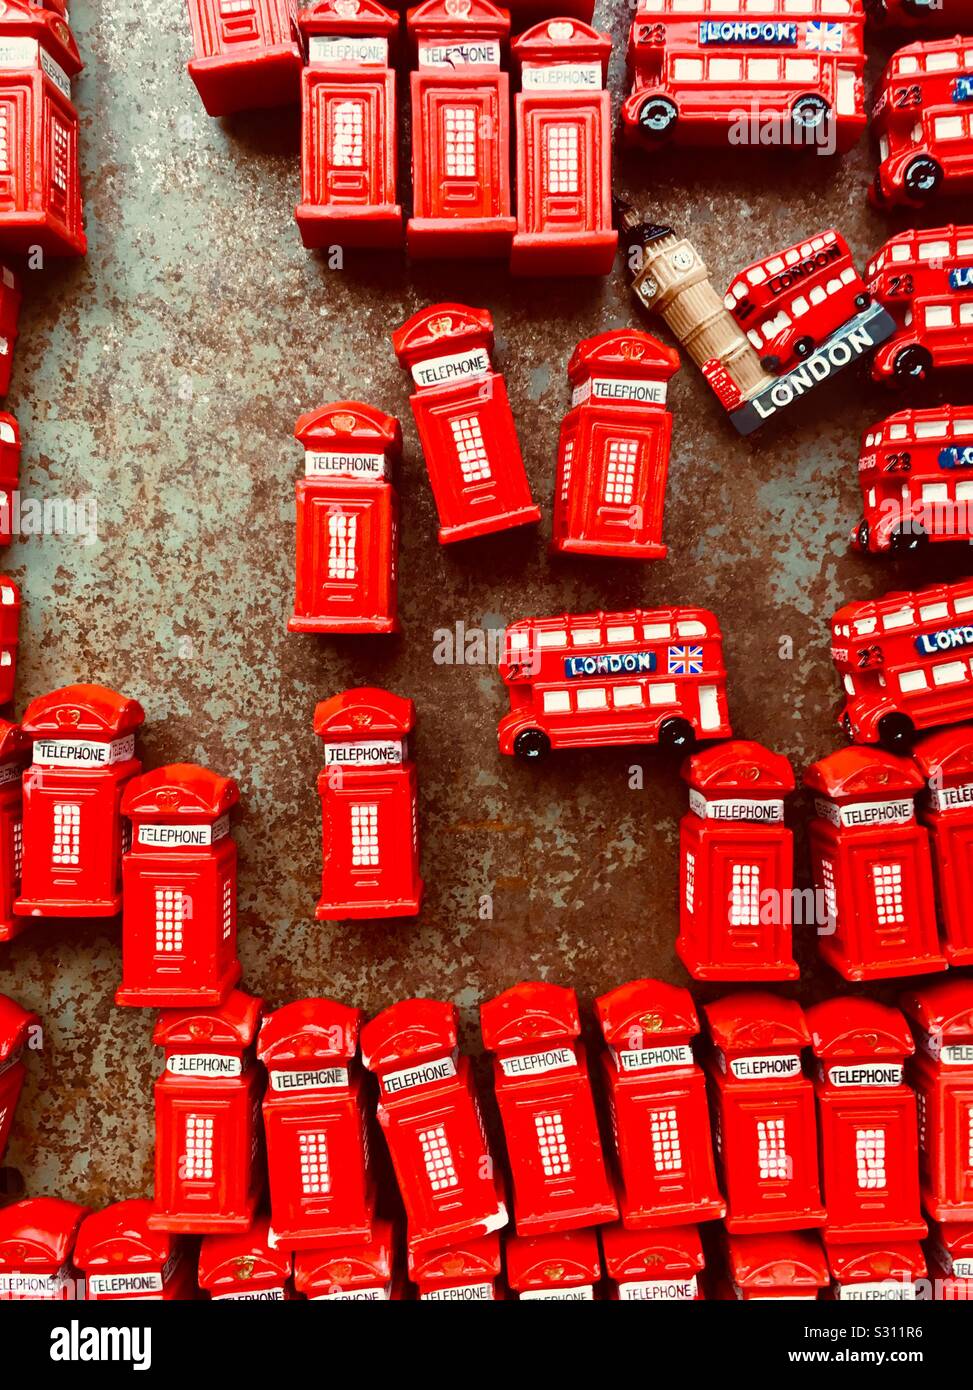 London souvenir magnets, red phone boxes and red buses Stock Photo